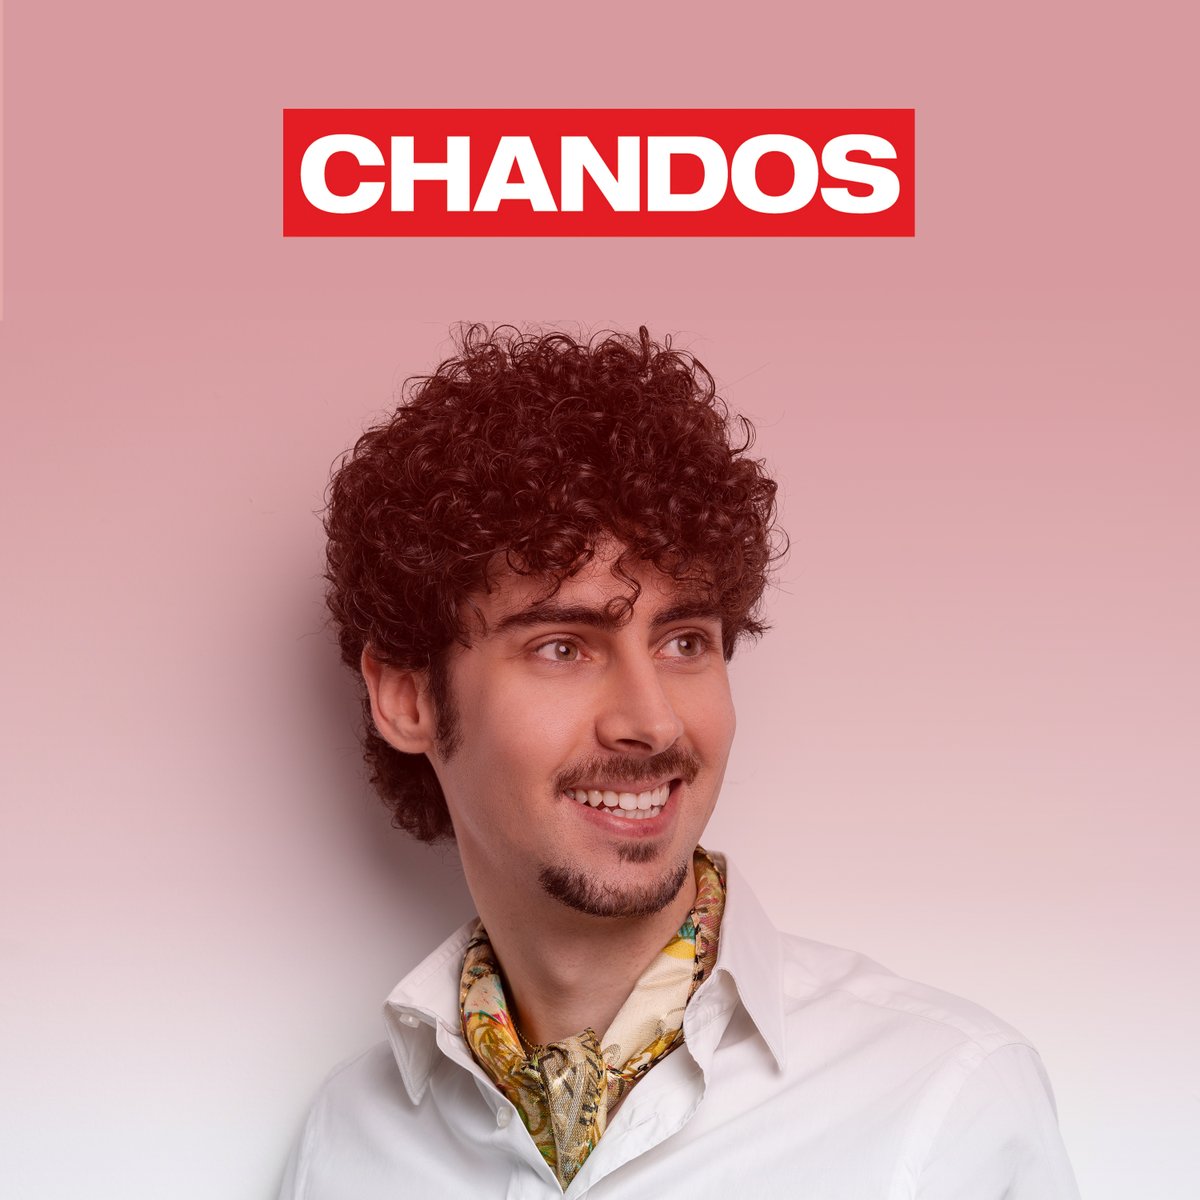 Enjoy The Sound of Chandos playlist to calm your mind this weekend. 🎧 spoti.fi/3aSR9sN Feauring the latest from @Federico_Colli @SinfoniaOfLondn @TheCBSO @MancCamerata @michaelcmchale & the famous melody Long Since in... from @will_vann's Judith. @kathrynrudge @thechoir